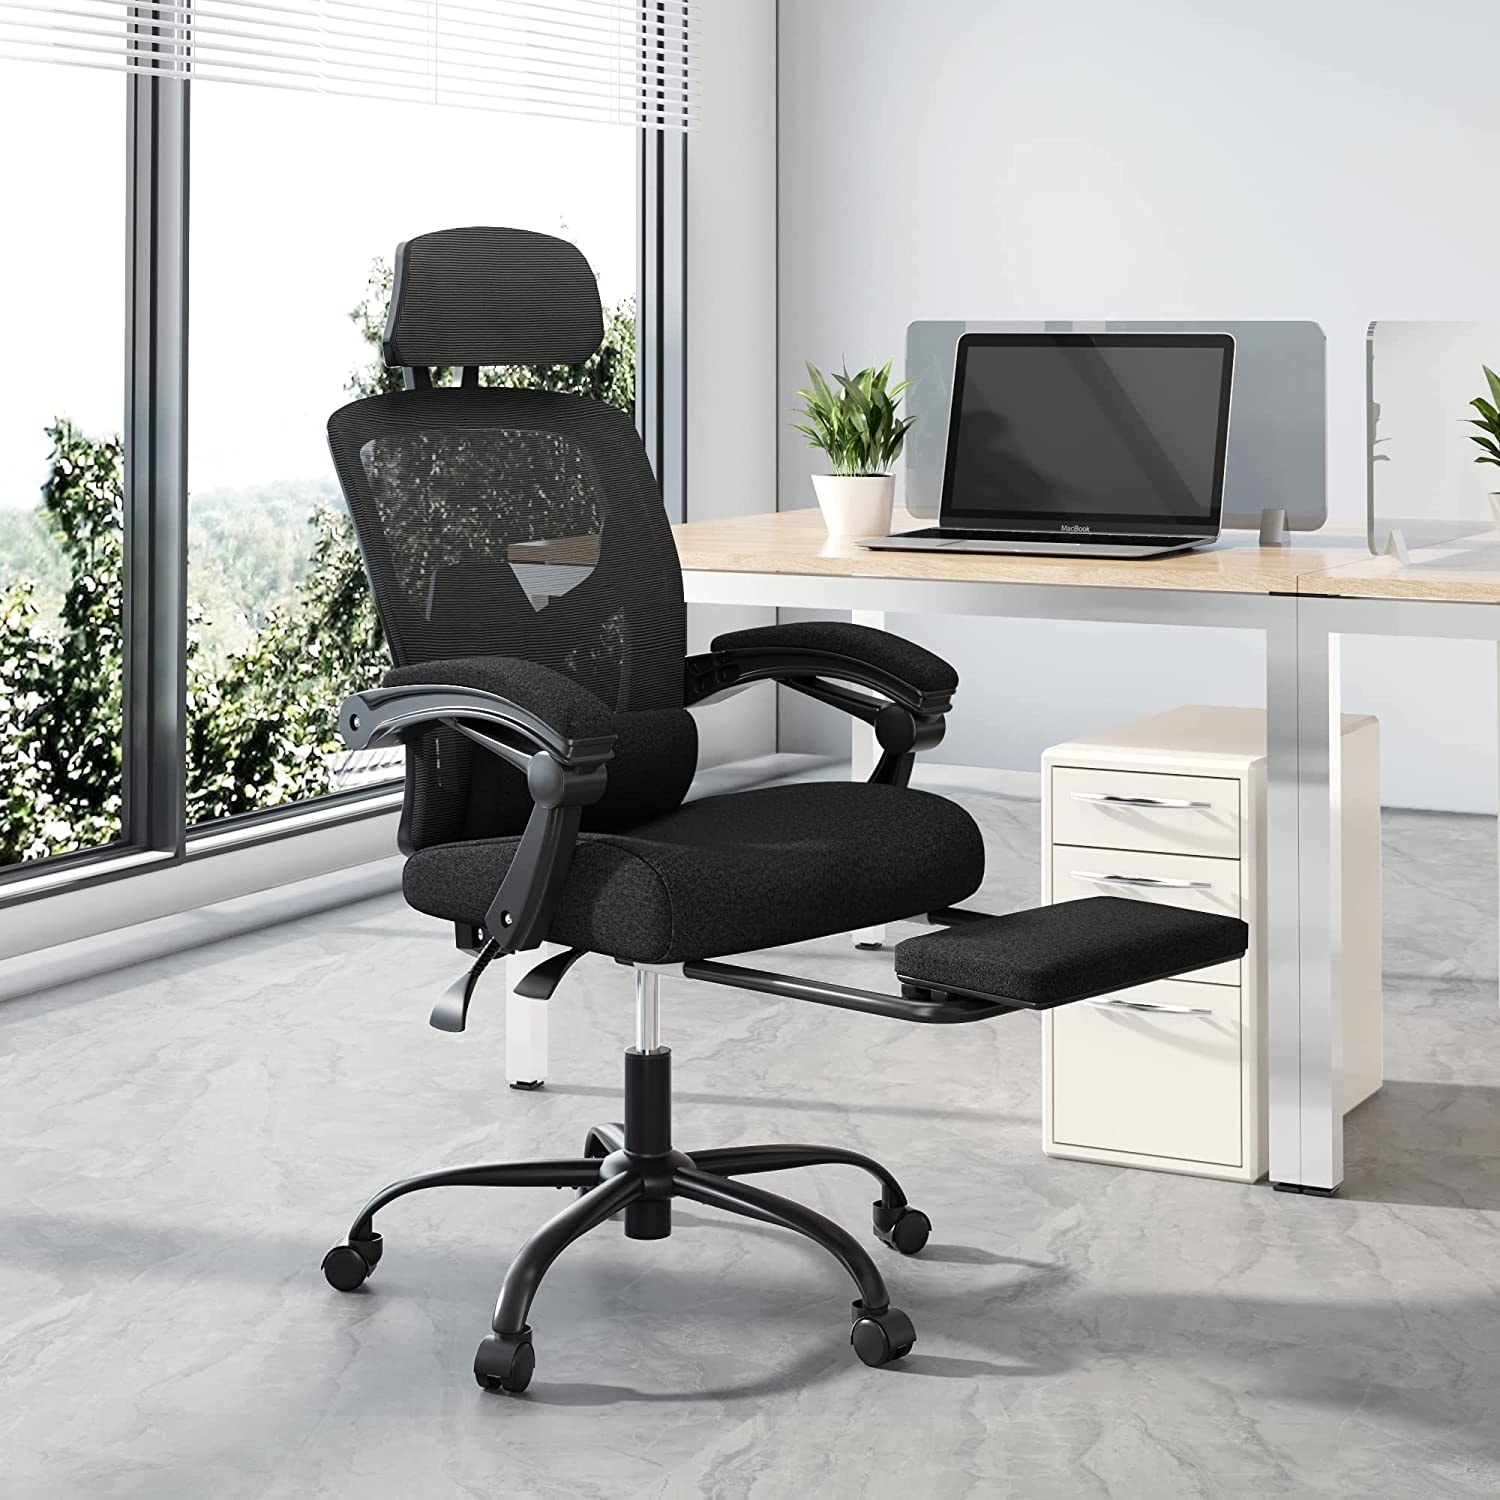 https://ak1.ostkcdn.com/images/products/is/images/direct/b007db1b80ccb5985db810e77d8b079e66dd68c7/Snugway-Ergonomic-High-Back-Mesh-Home-Office-Chair-with-Footrest.jpg